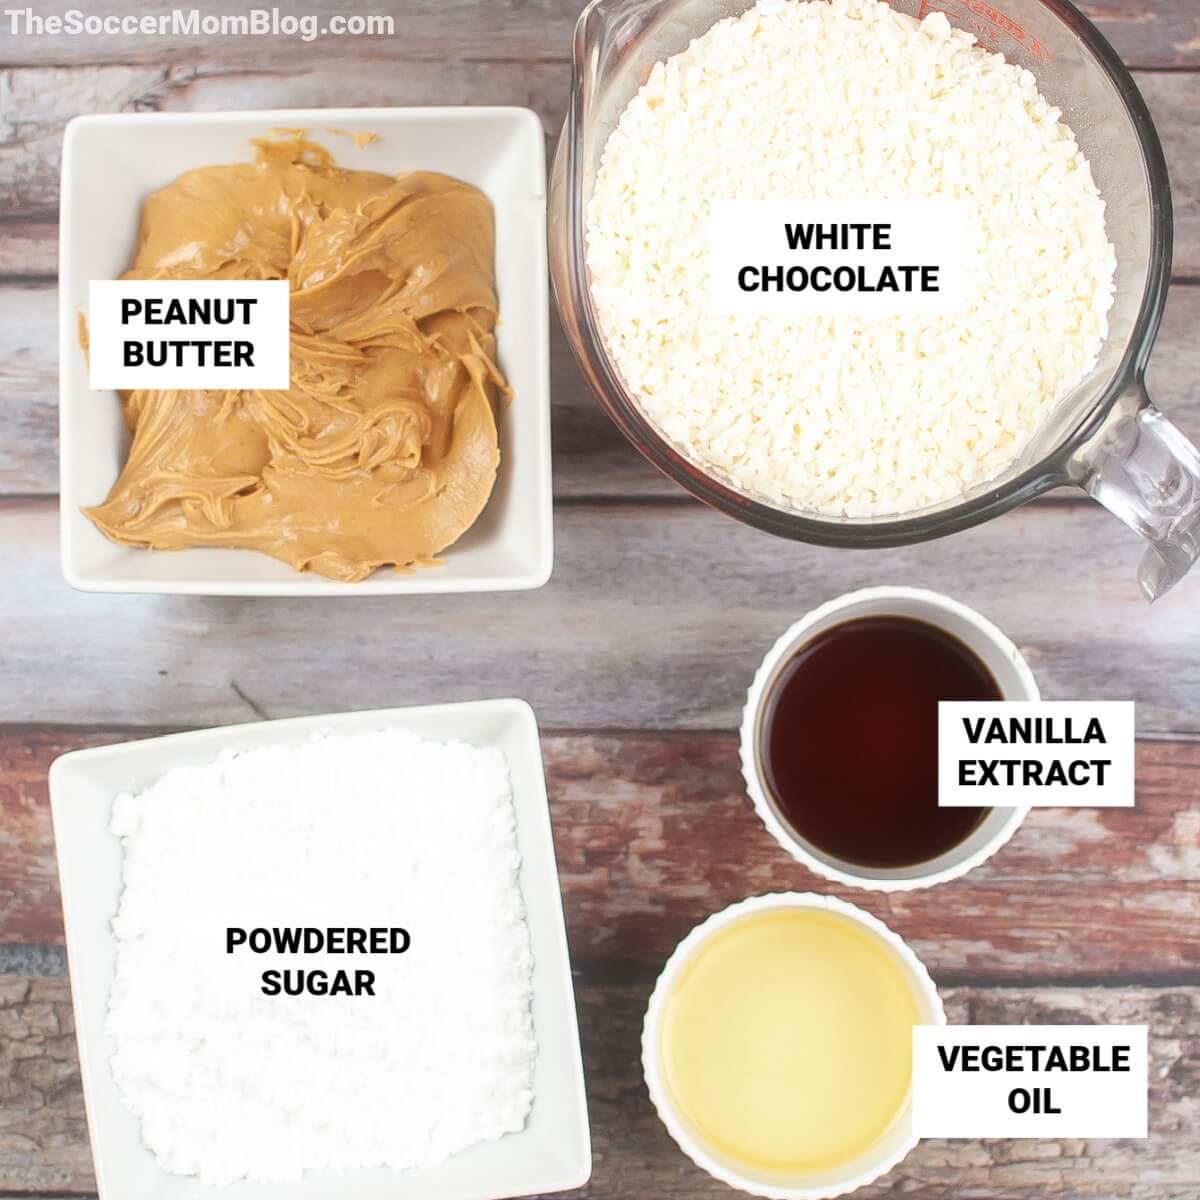 Ingredients for Reese's White Chocolate Peanut Butter Cups, with text labels (peanut butter, white chocolate, powdered sugar, vanilla, vegetable oil)